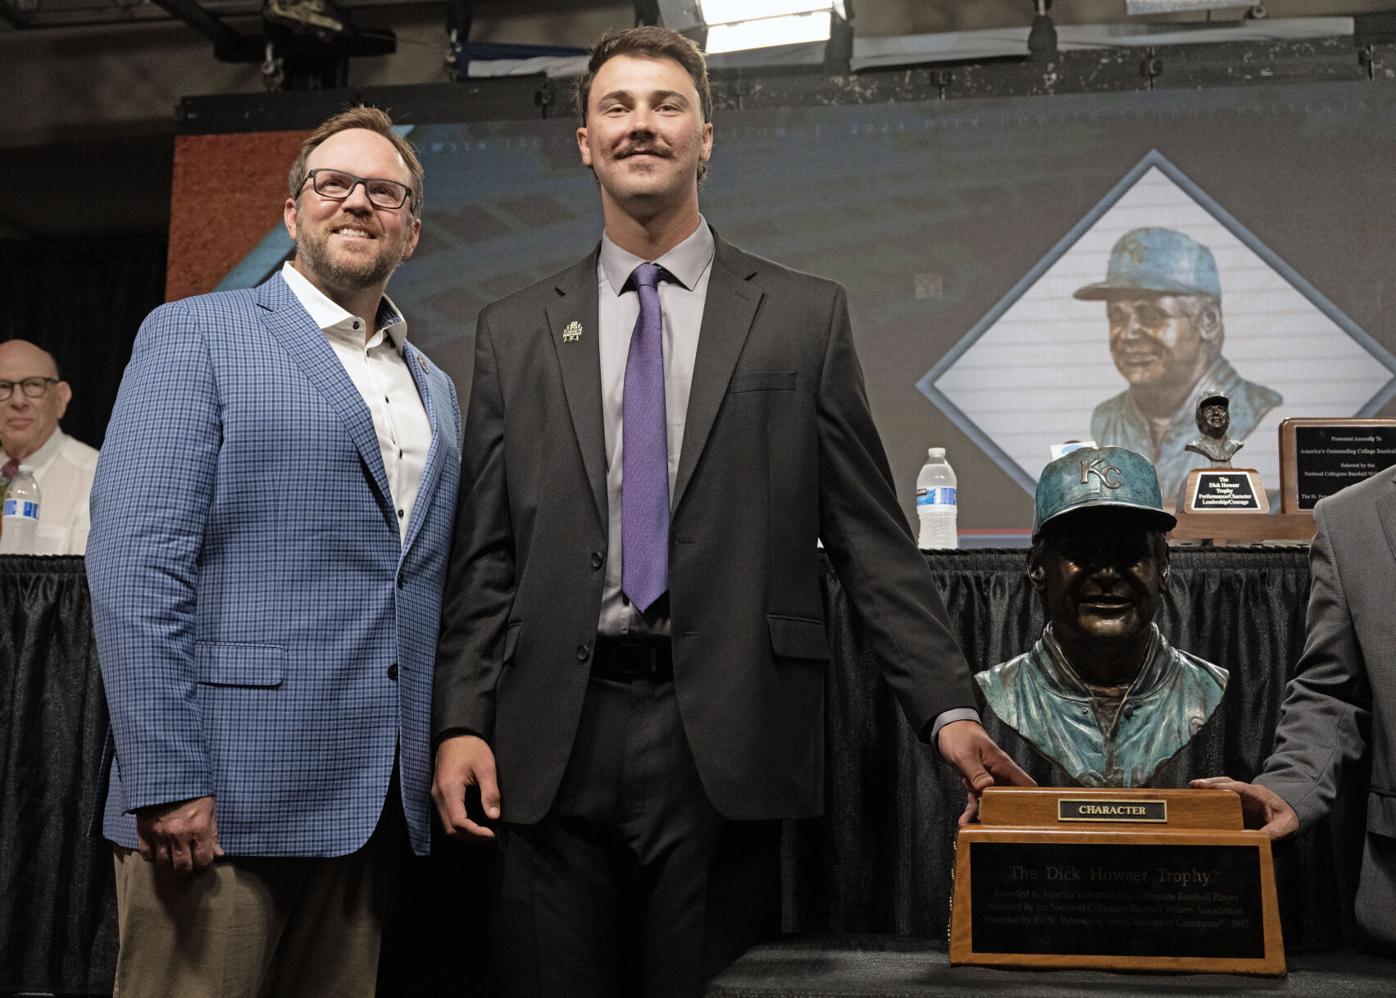 LSU pitcher Paul Skenes wins Dick Howser Award - And The Valley Shook